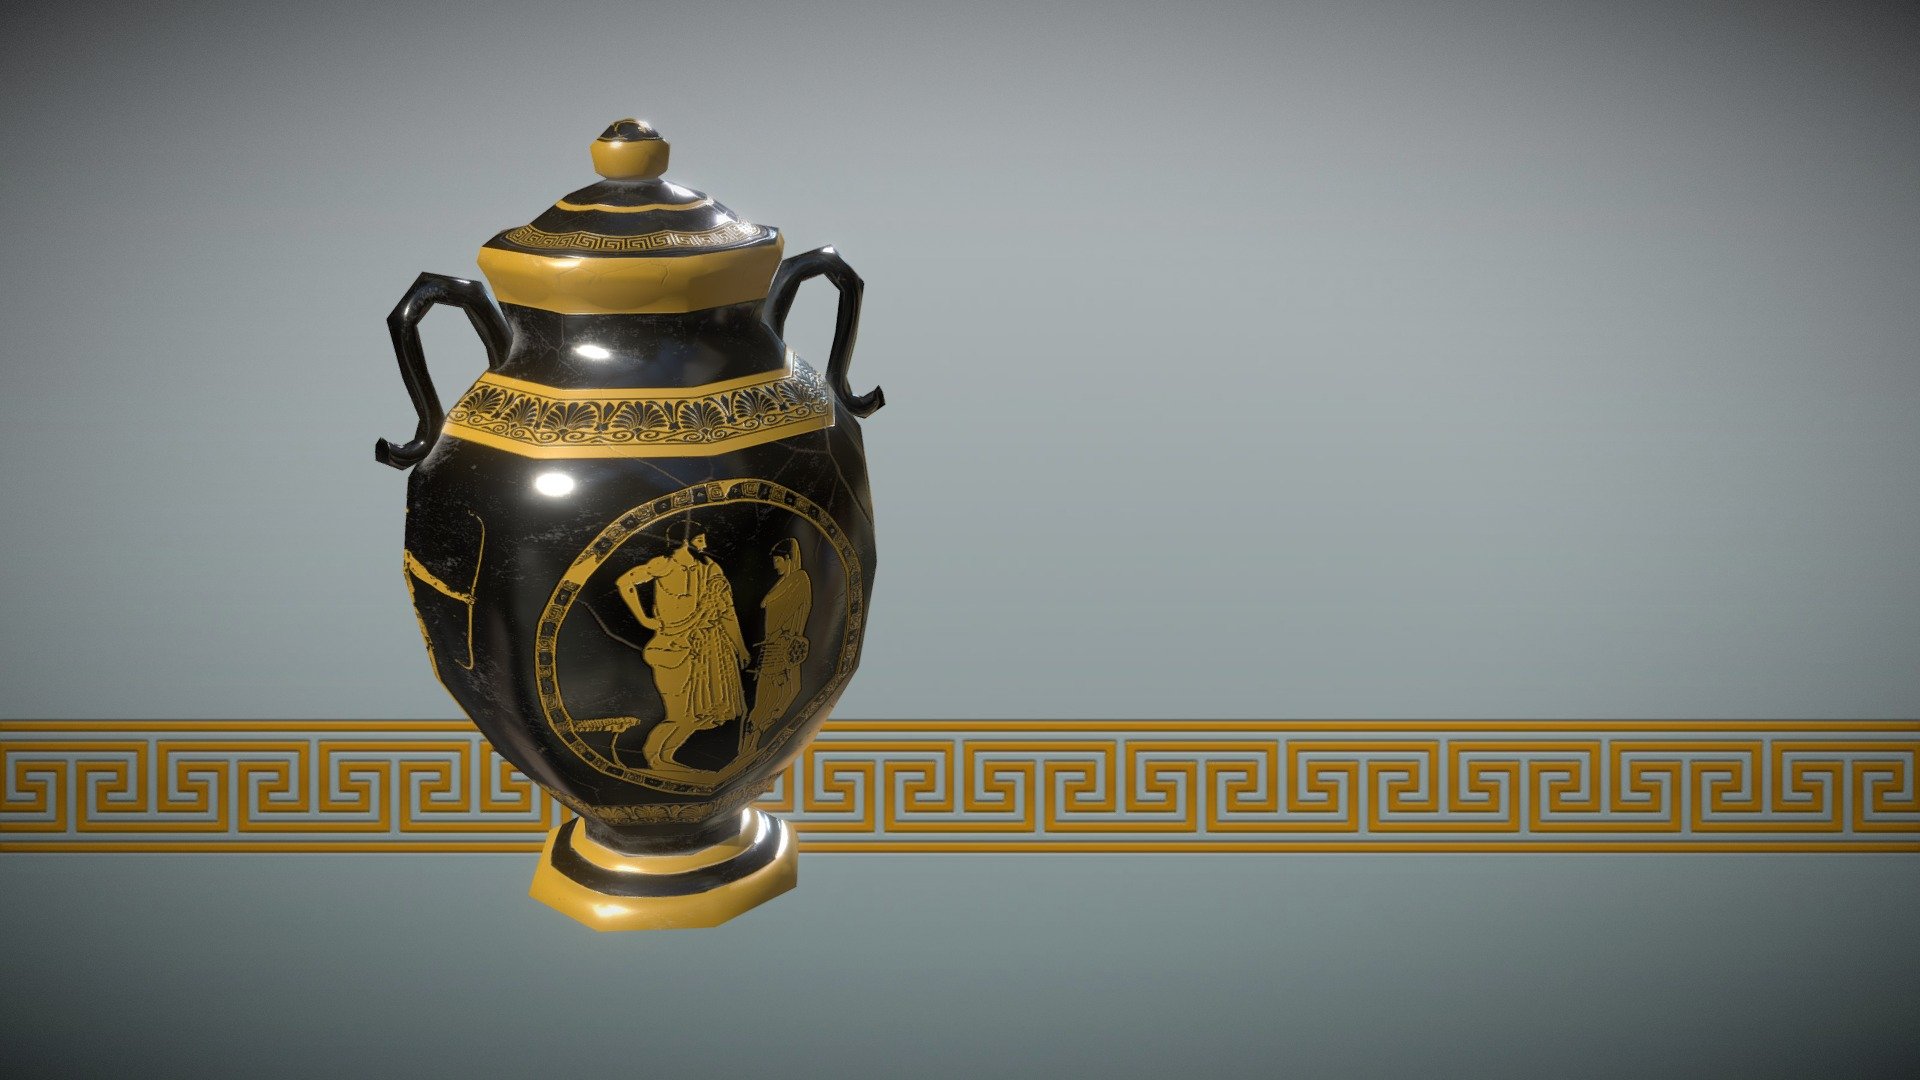 Here is a double-handled lidded urn in an ancient Greek style 3d model